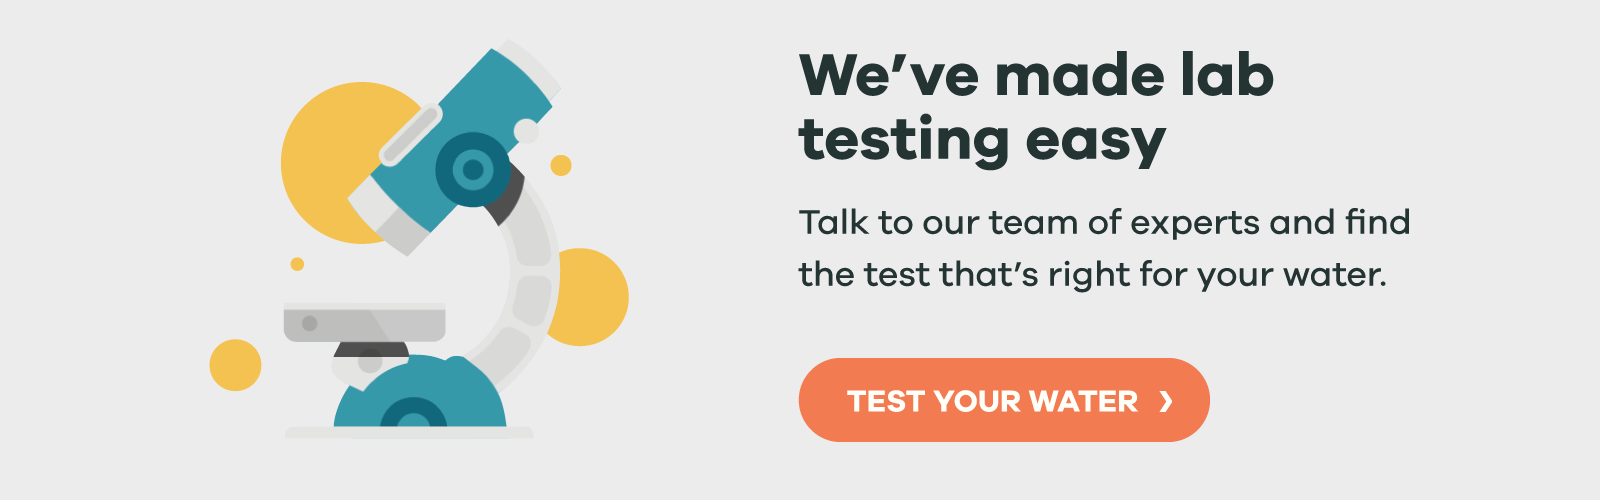 Water Testing Made Easy with Tap Score